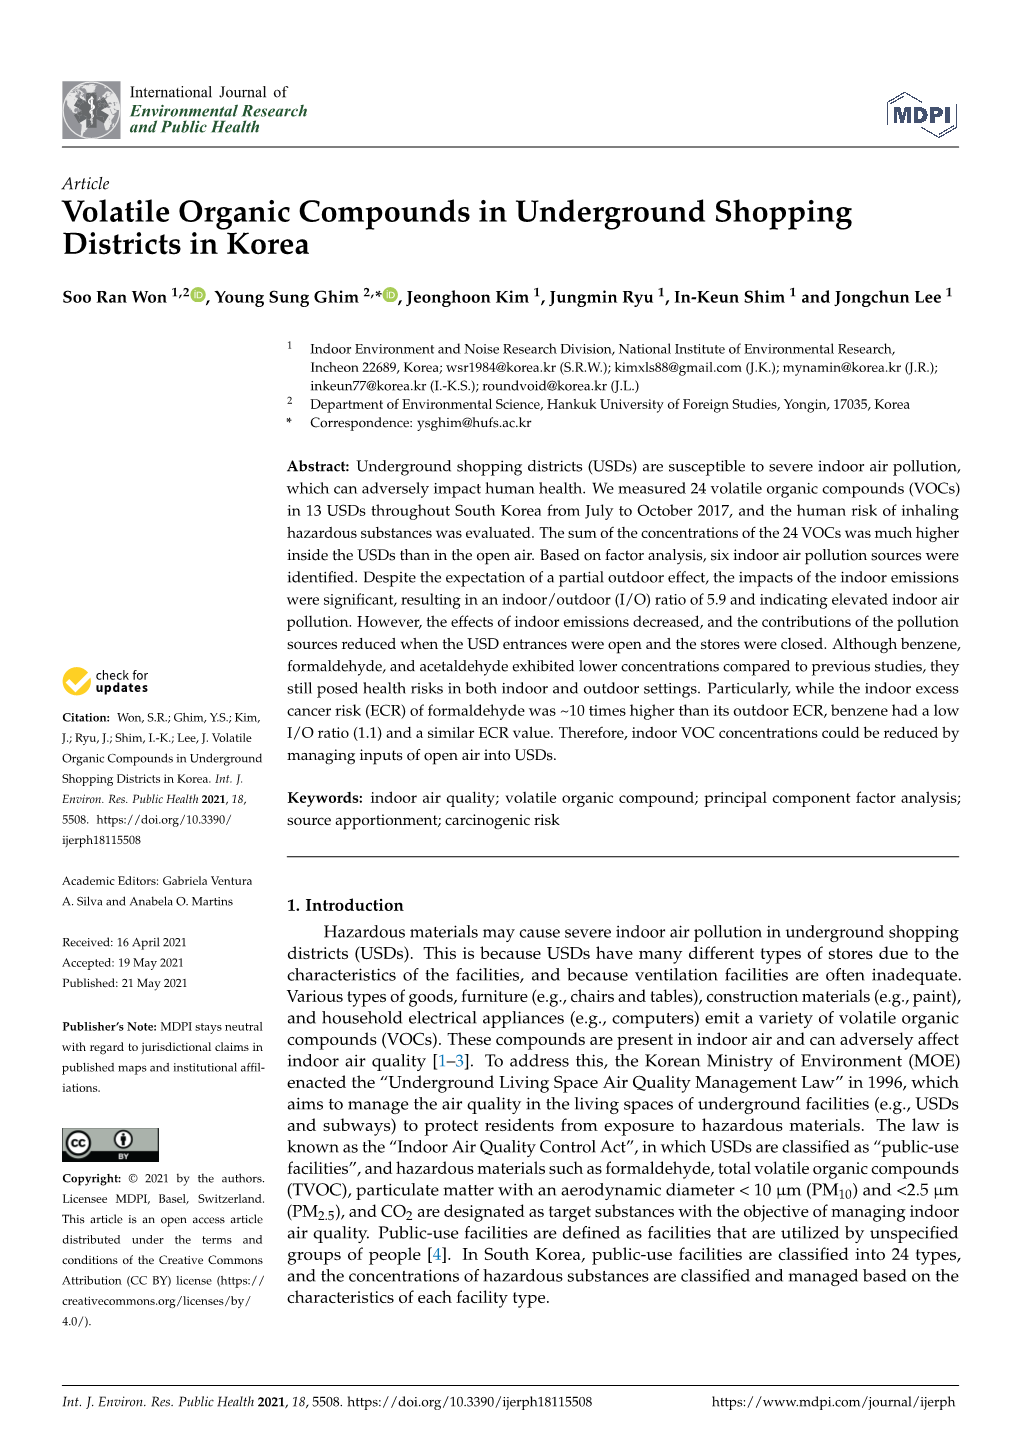 Volatile Organic Compounds in Underground Shopping Districts in Korea